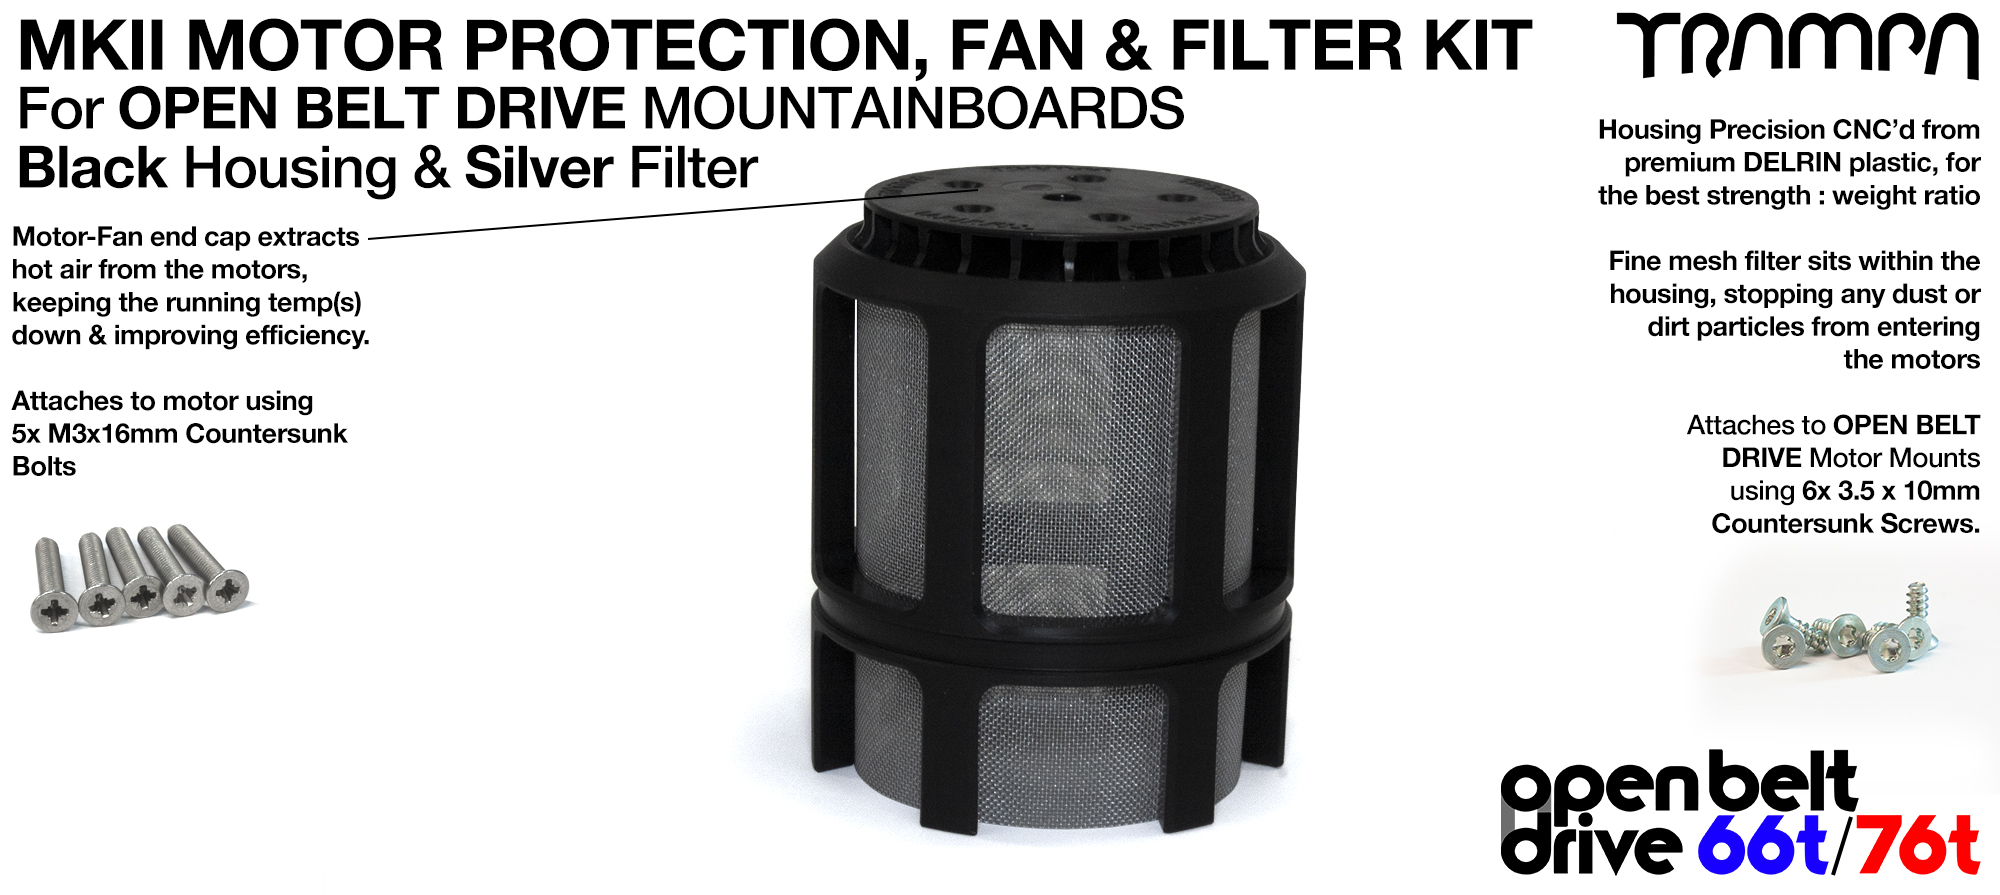 1x OBD MKII Motor protection Sleeve with SILVER Filter 